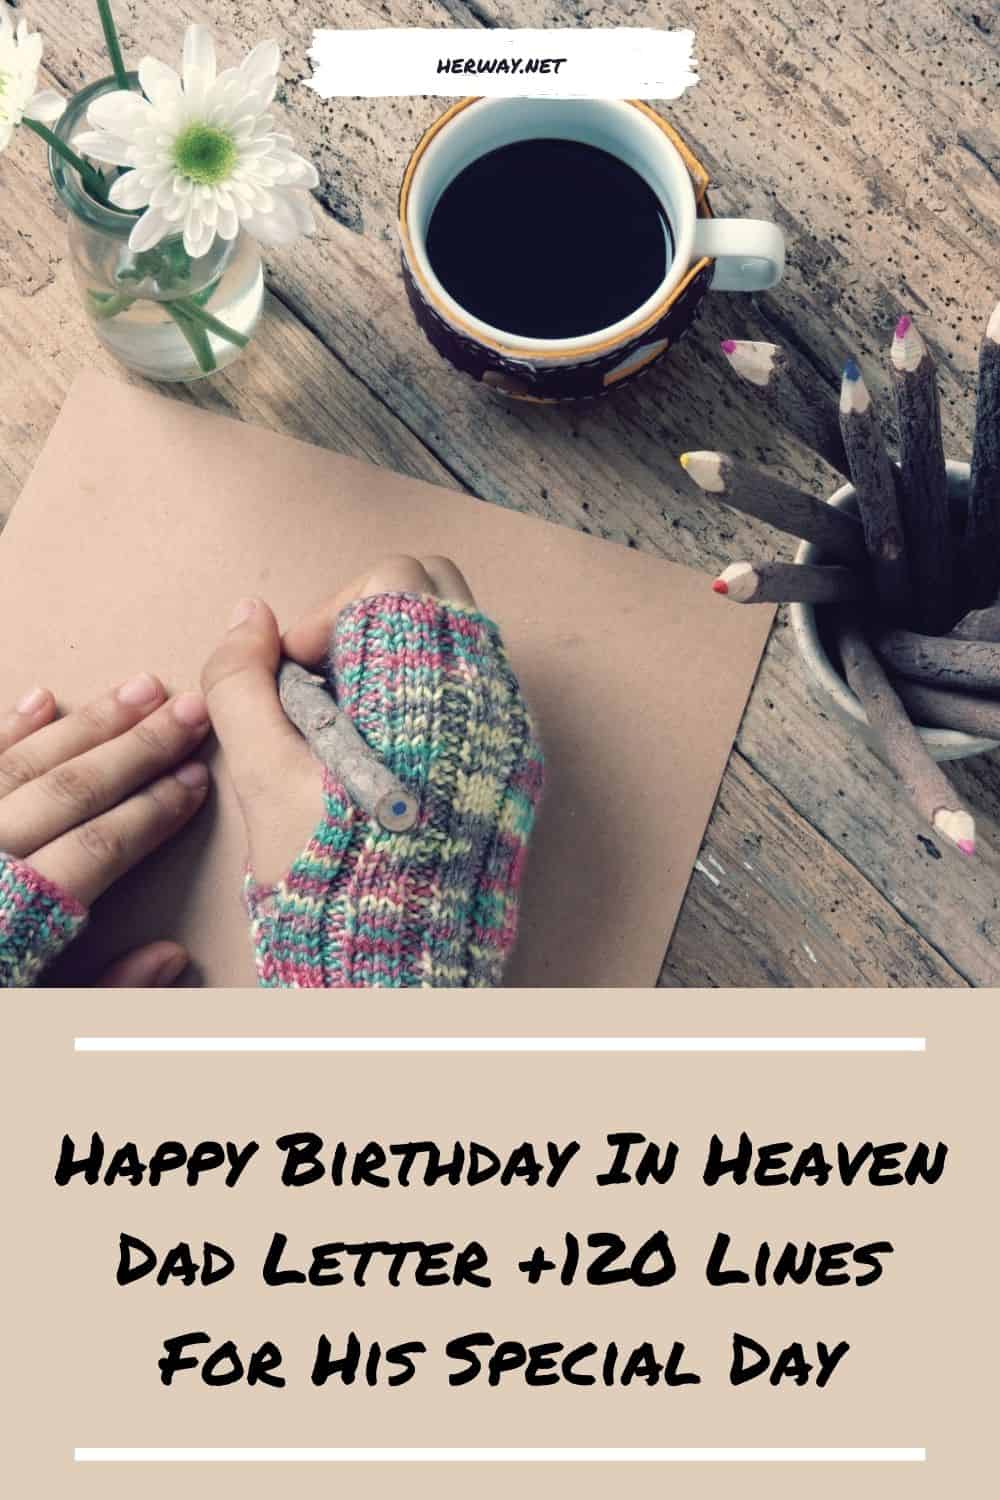 Happy Birthday In Heaven Dad Letter +120 Lines For His Special Day